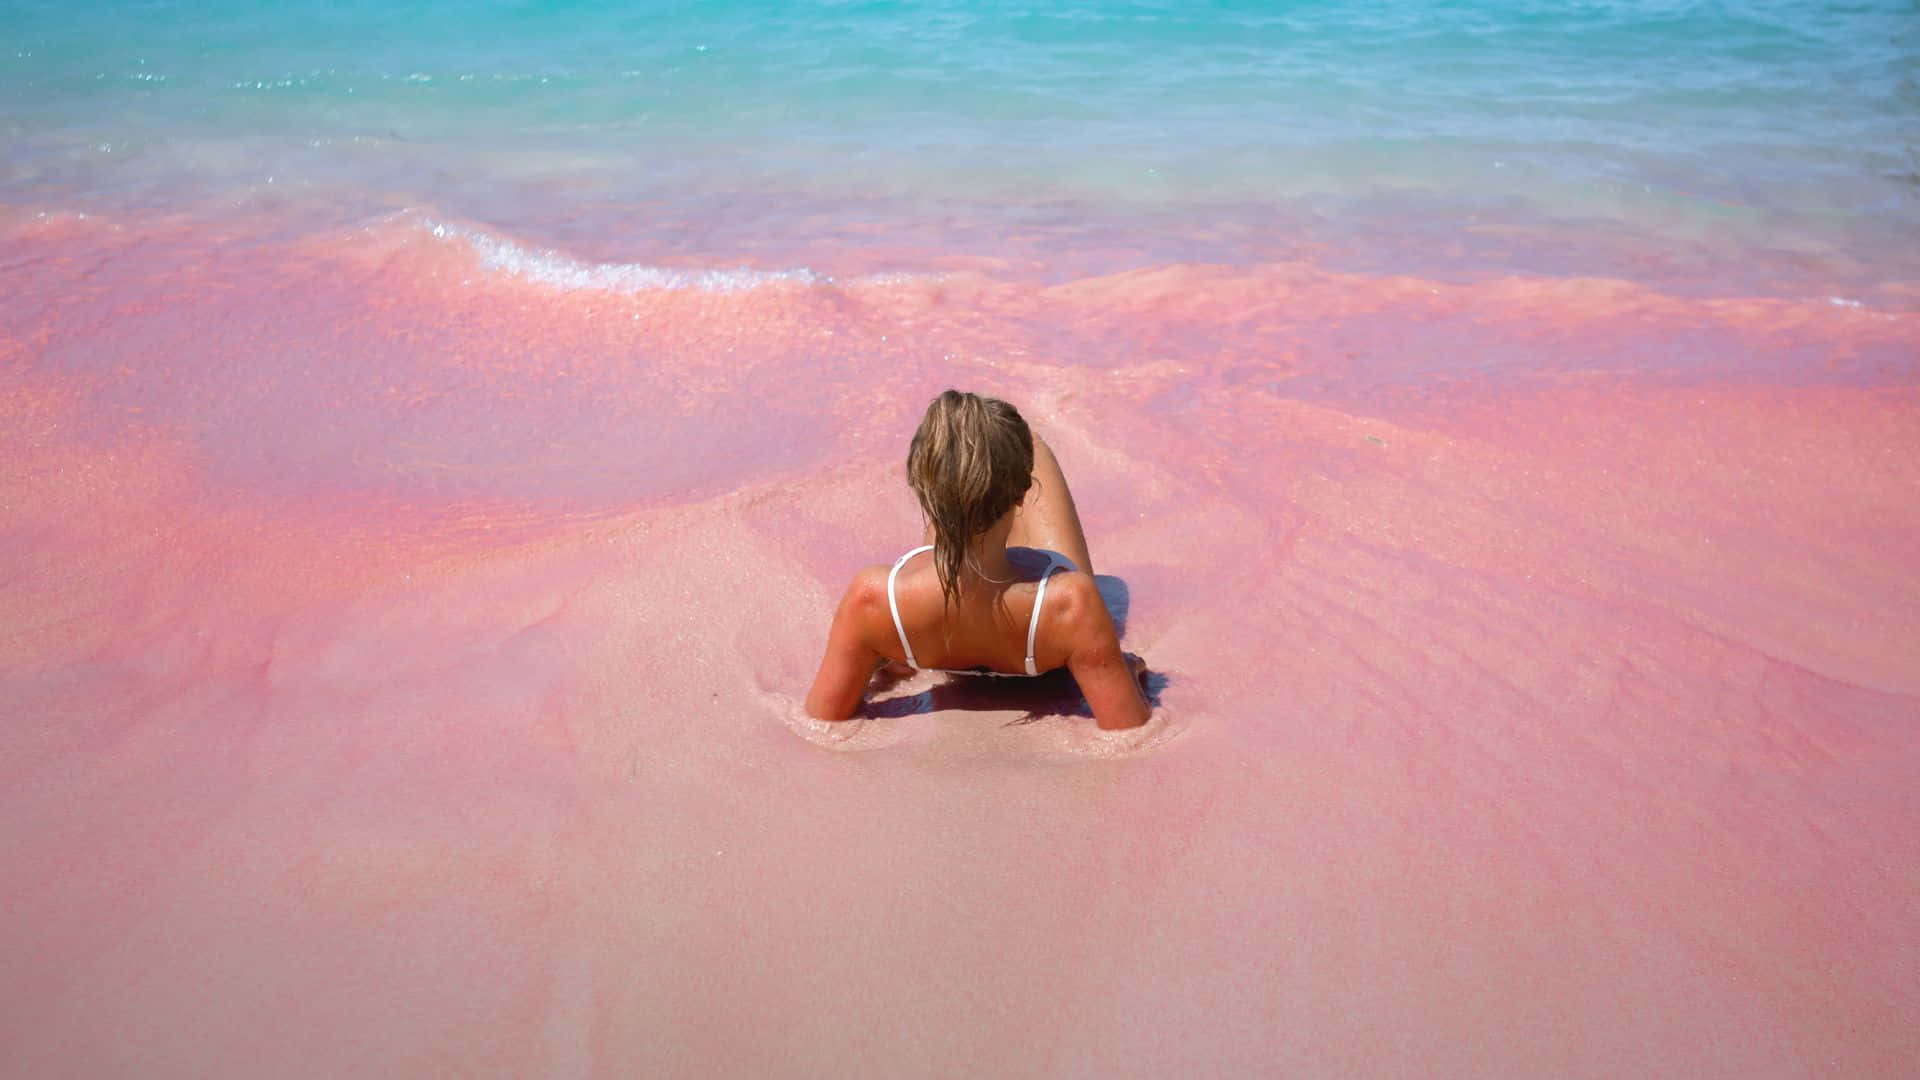 Discover the Serenity of Pink Beaches Wallpaper